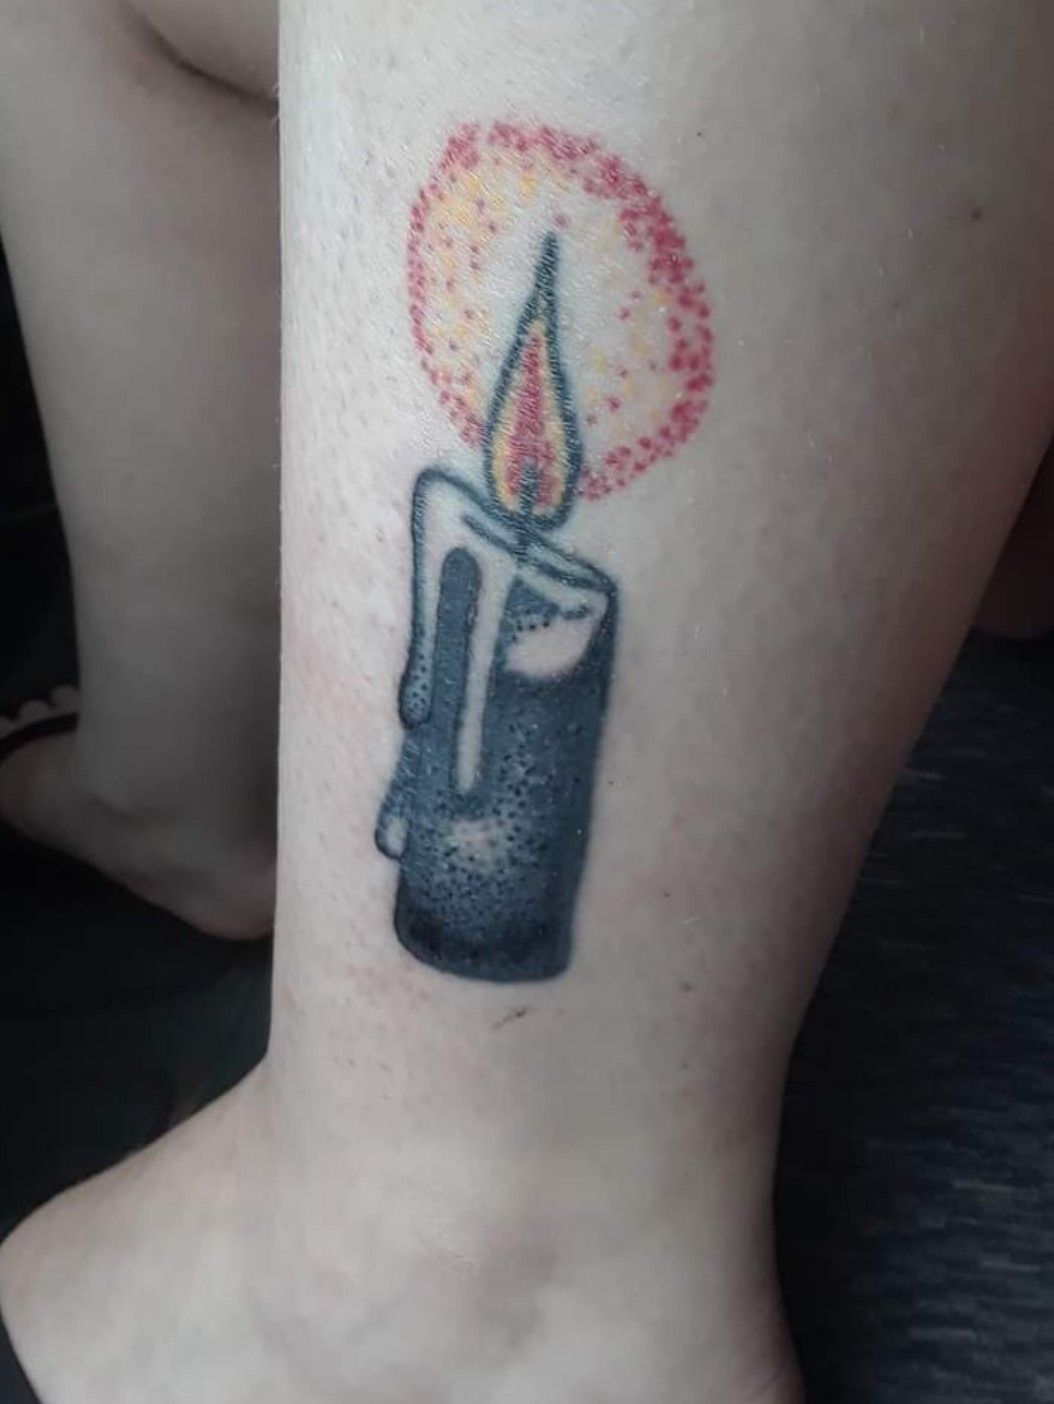 Candle tattoo on the left bicep